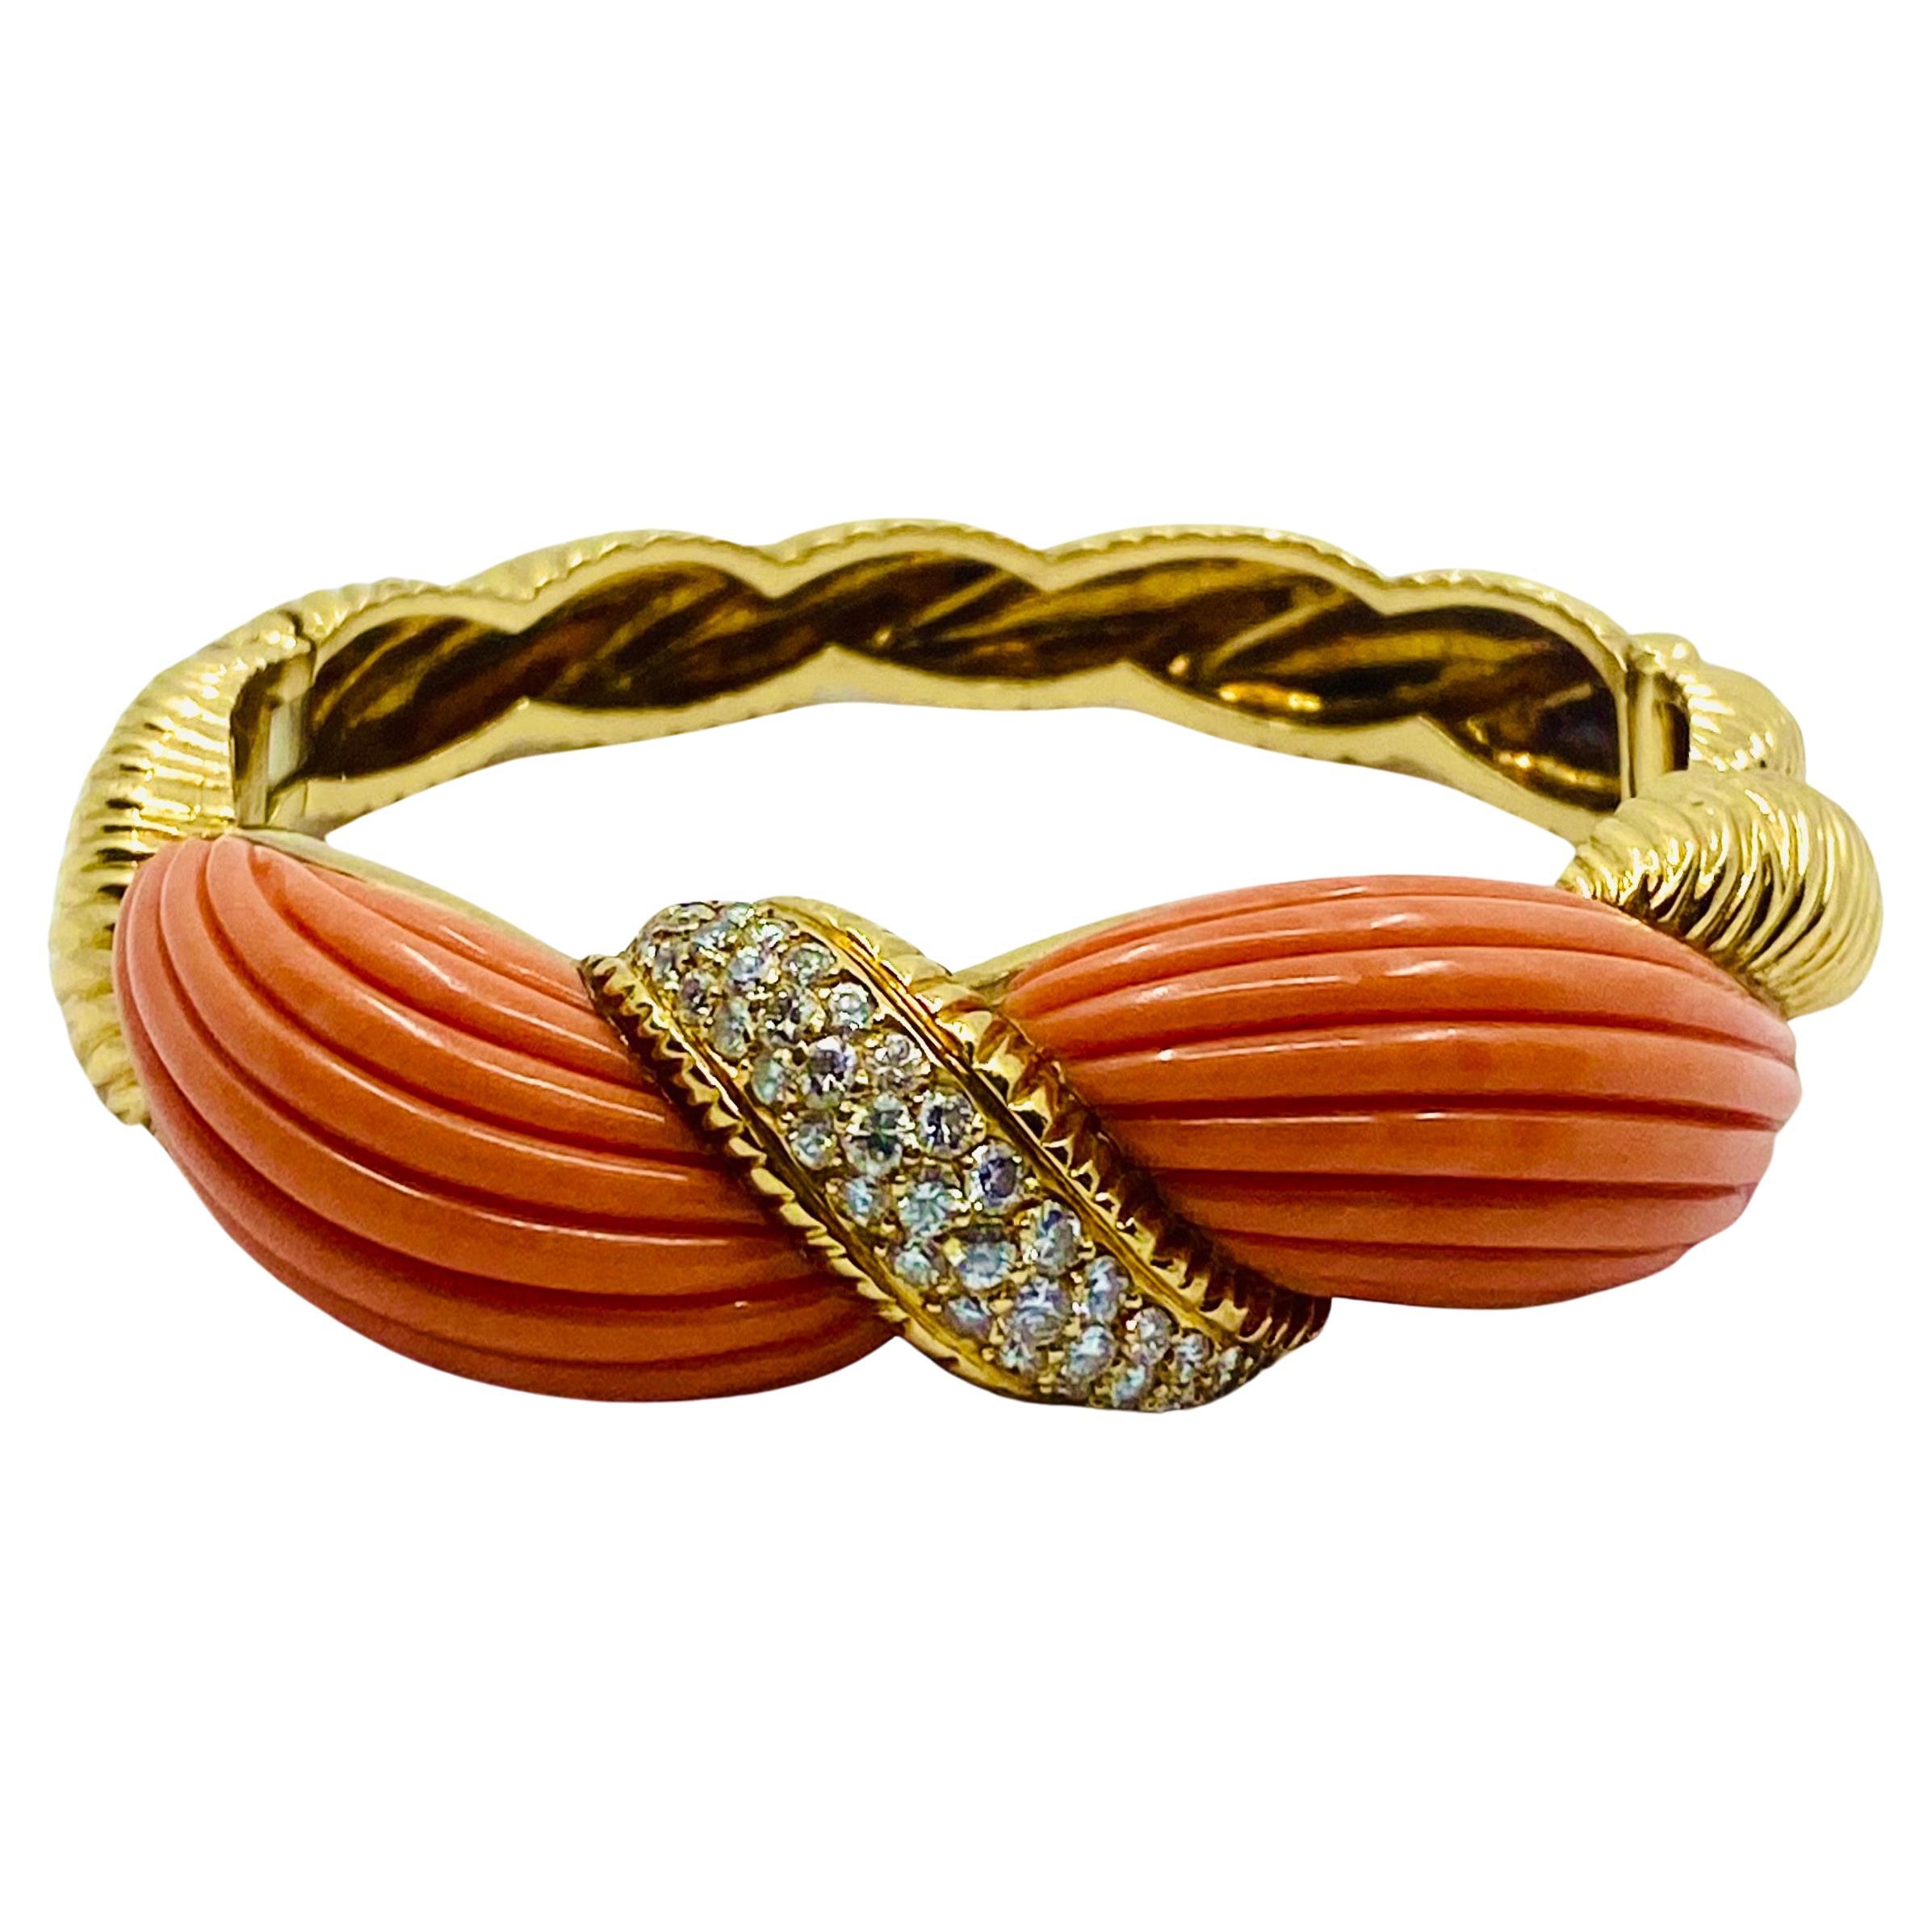 Asprey Bracelet 18k Gold Coral Bangle In Excellent Condition For Sale In Beverly Hills, CA